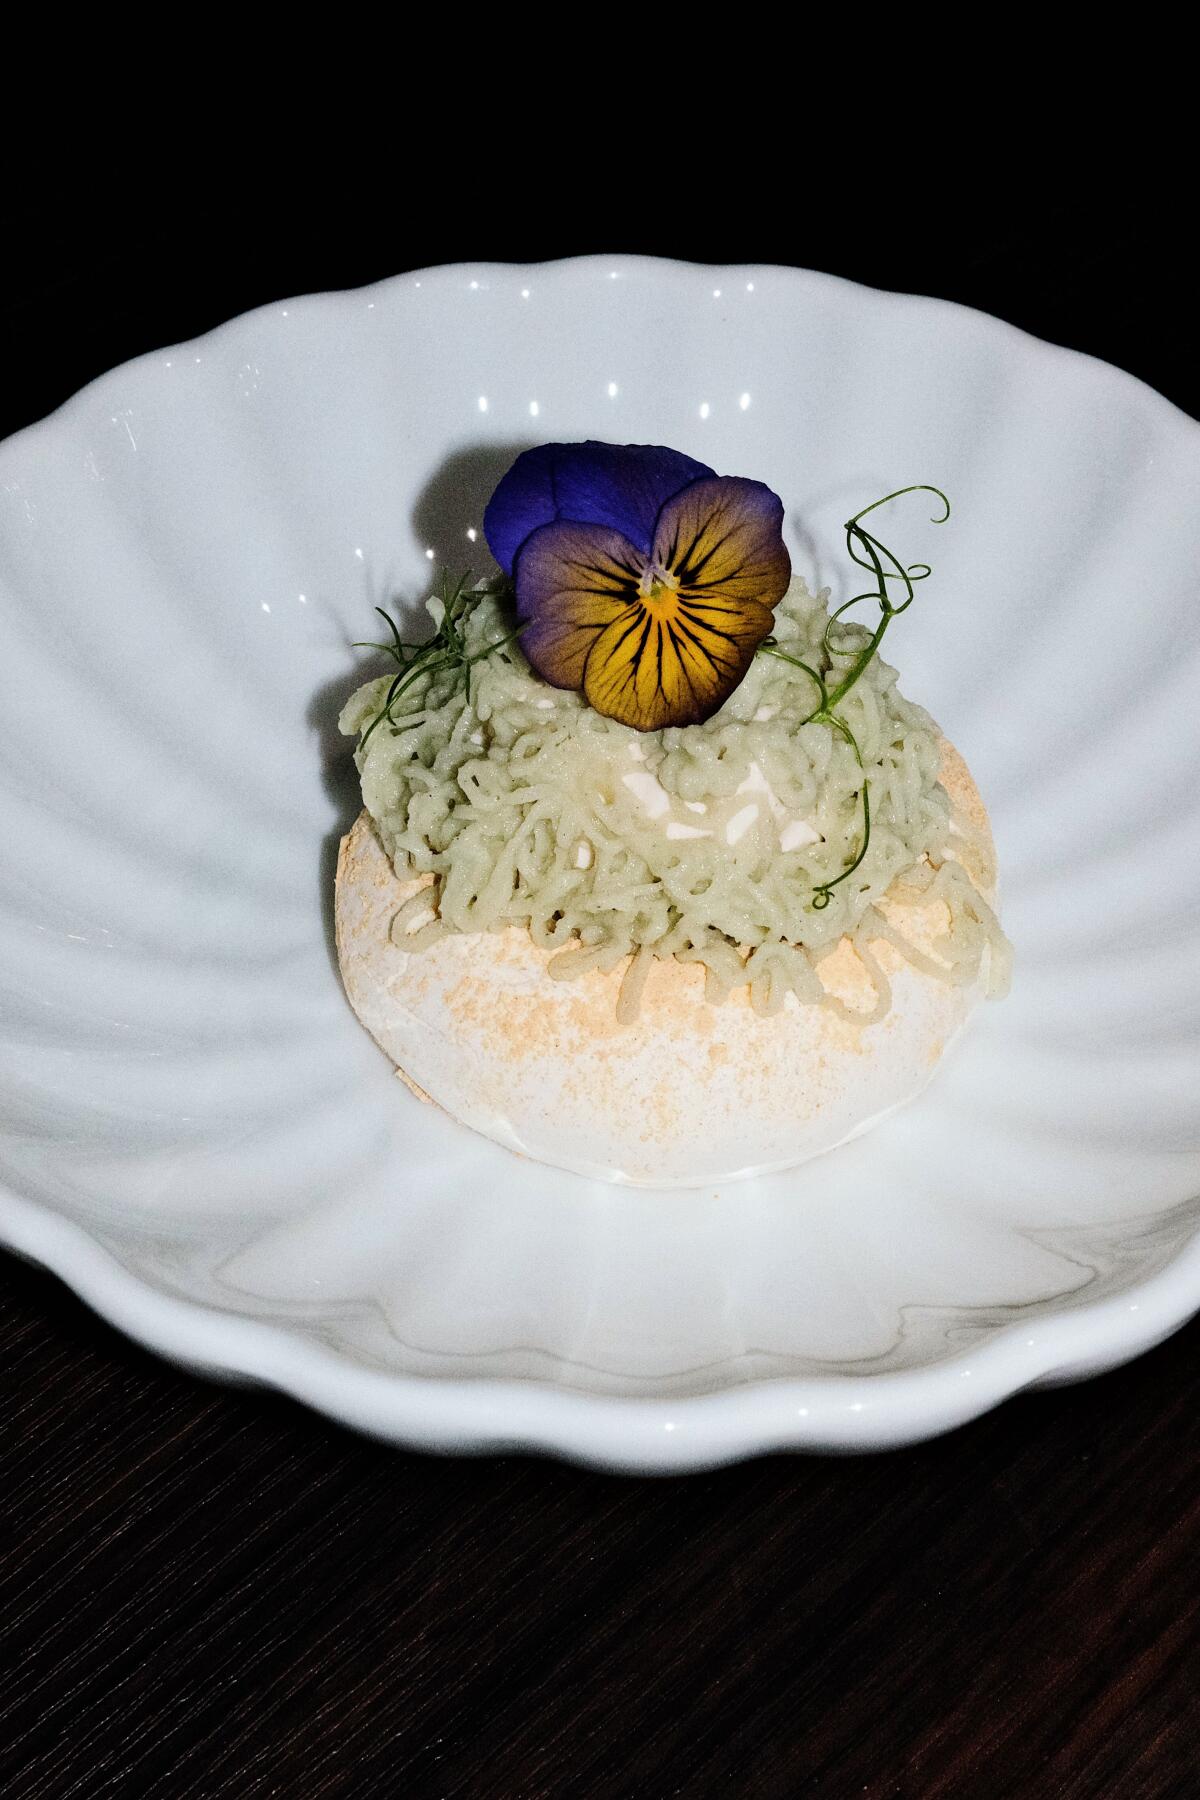 A vertical photo of Korean restaurant Danbi's Mont Holla dessert in a white bowl and adorned with an edible flower.